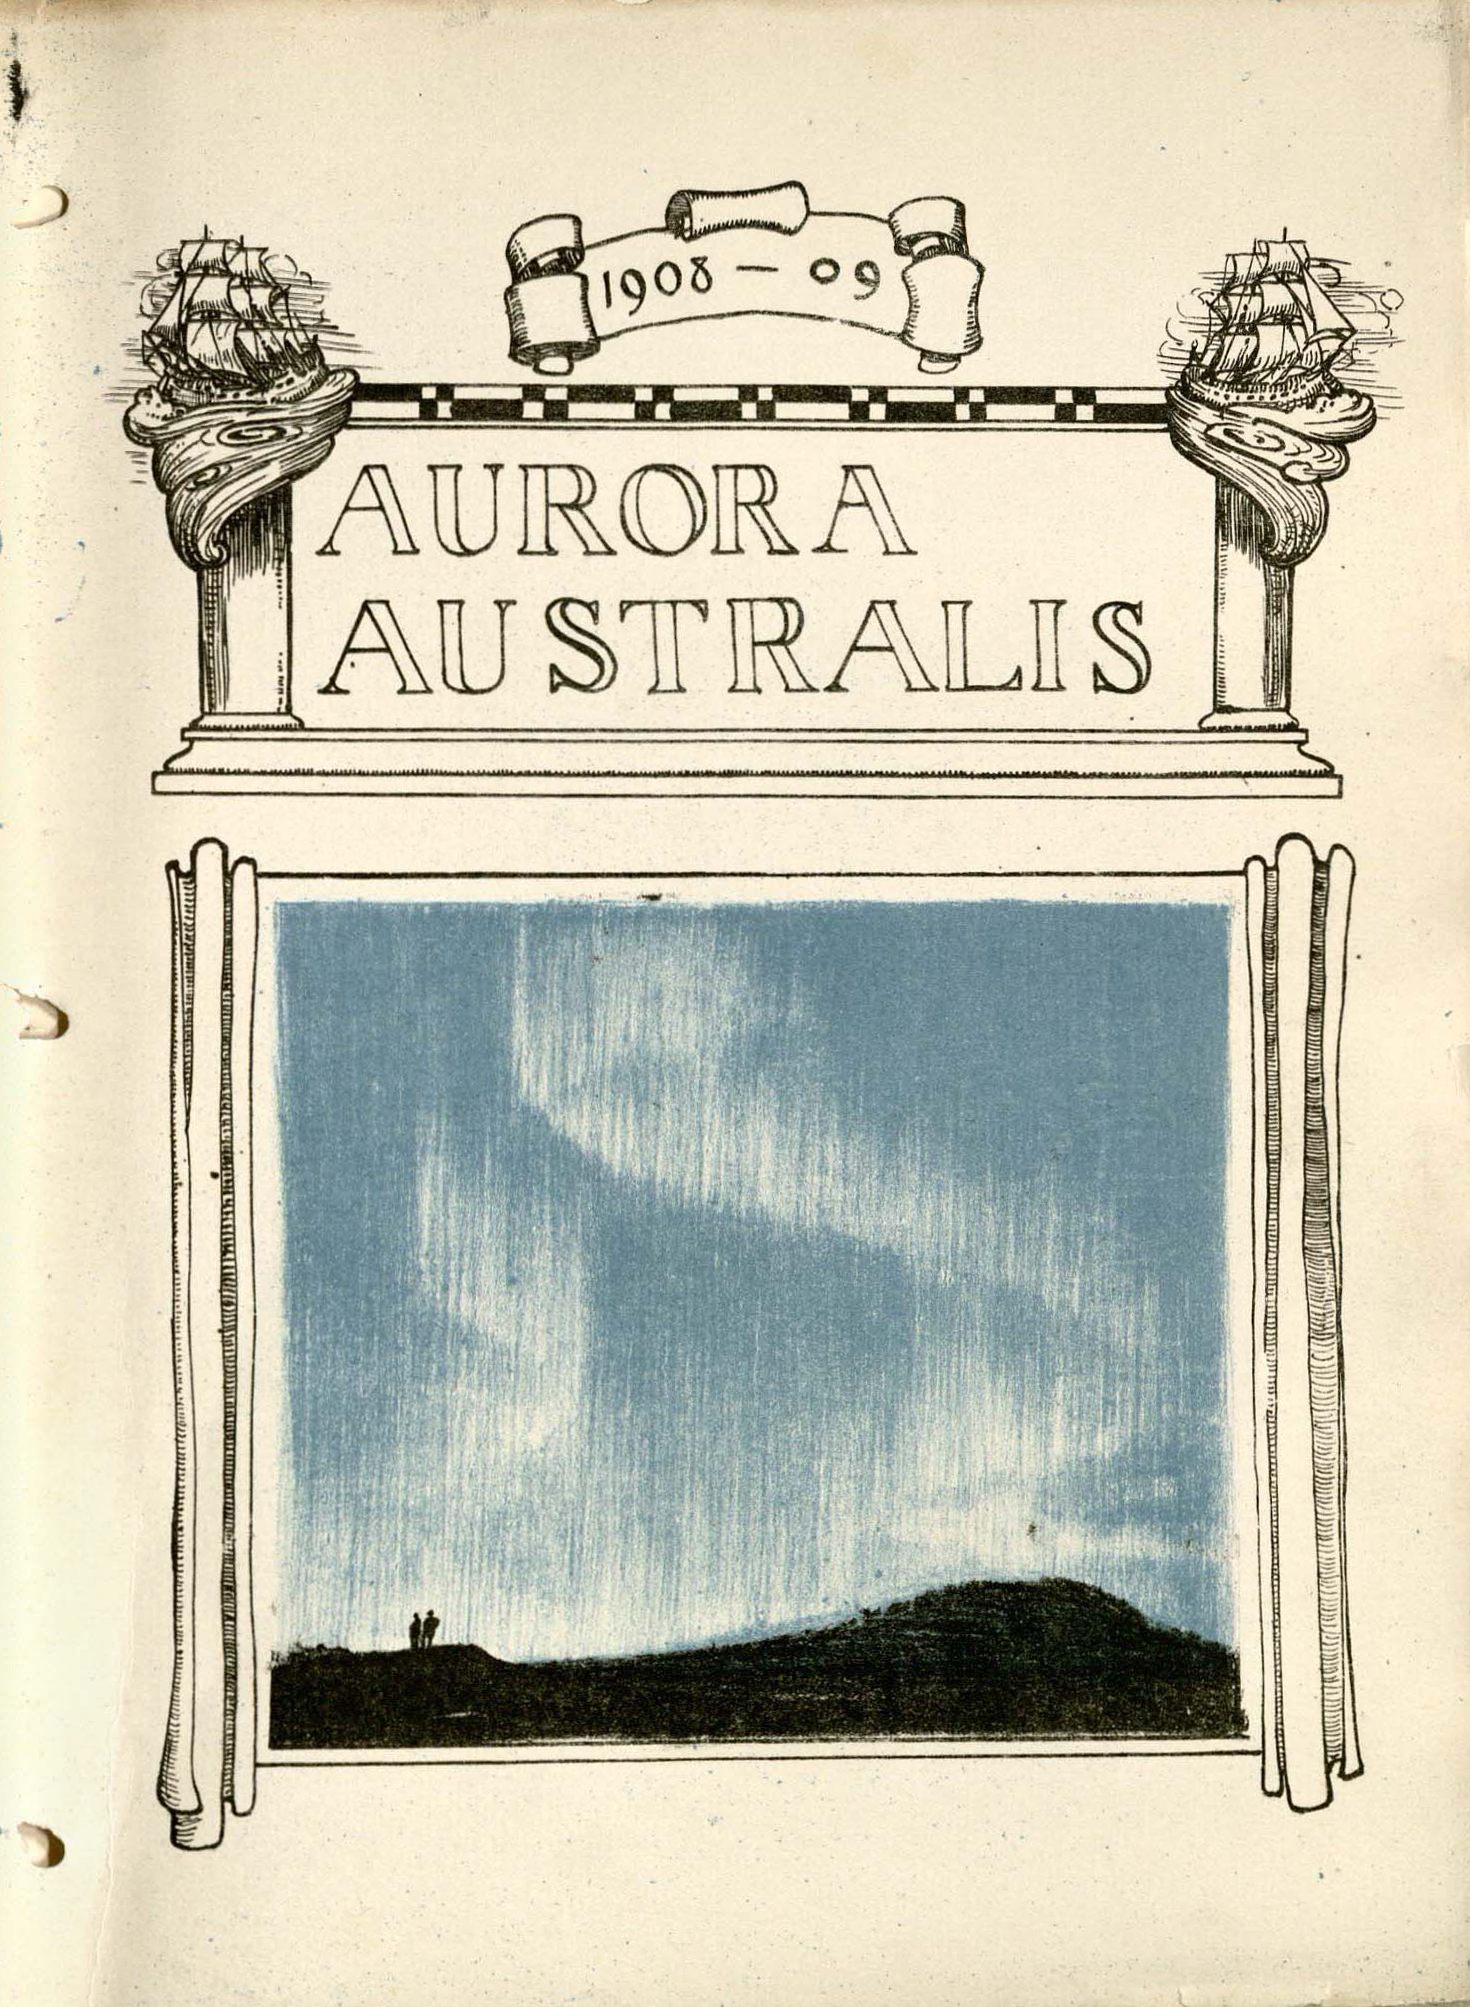 “The idea of creating a book like <em>Aurora Australis</em> was an extension of that long habit of inside jokes,” says Hester Blum.